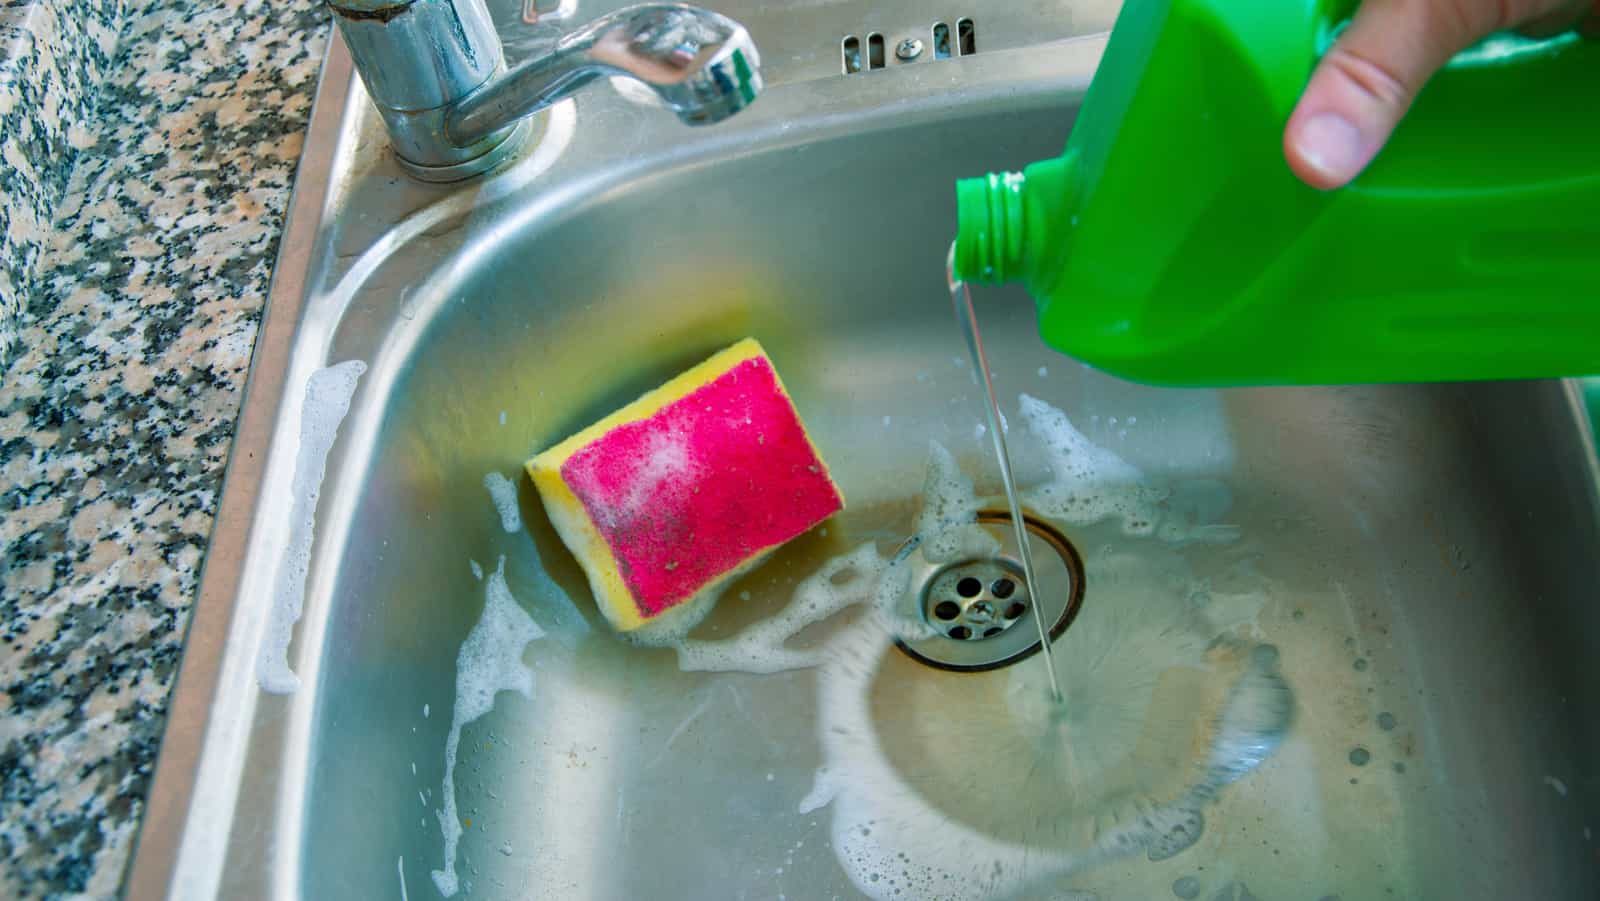 Can You Pour Bleach Down The Sink? Methods Explained With Caution!